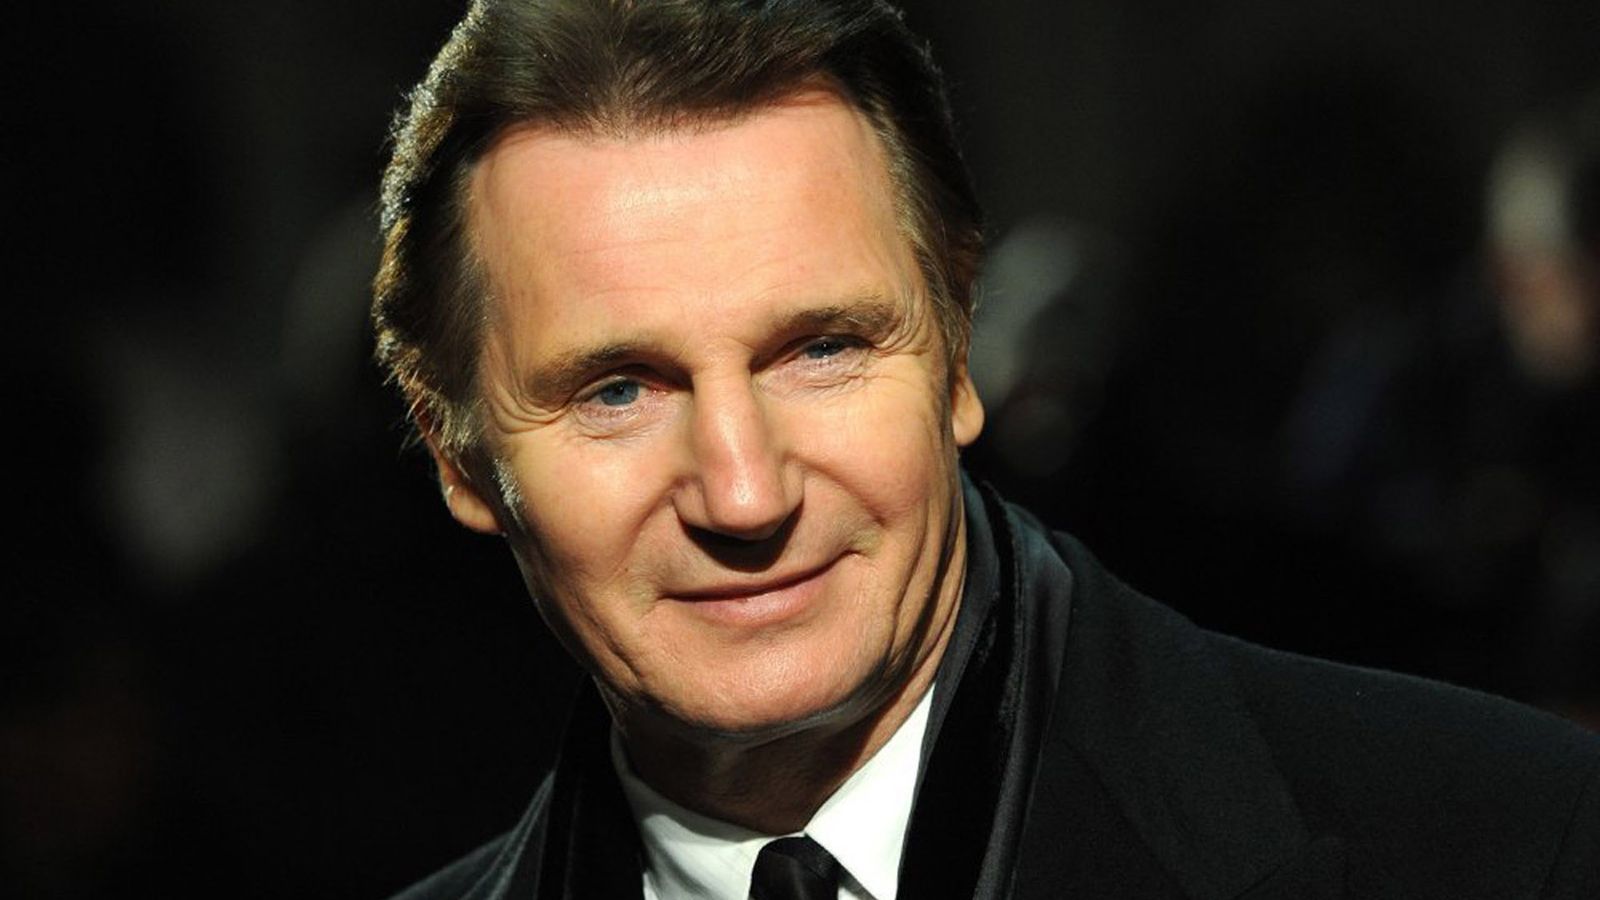 Liam Neeson set to star in A Willing Patriot